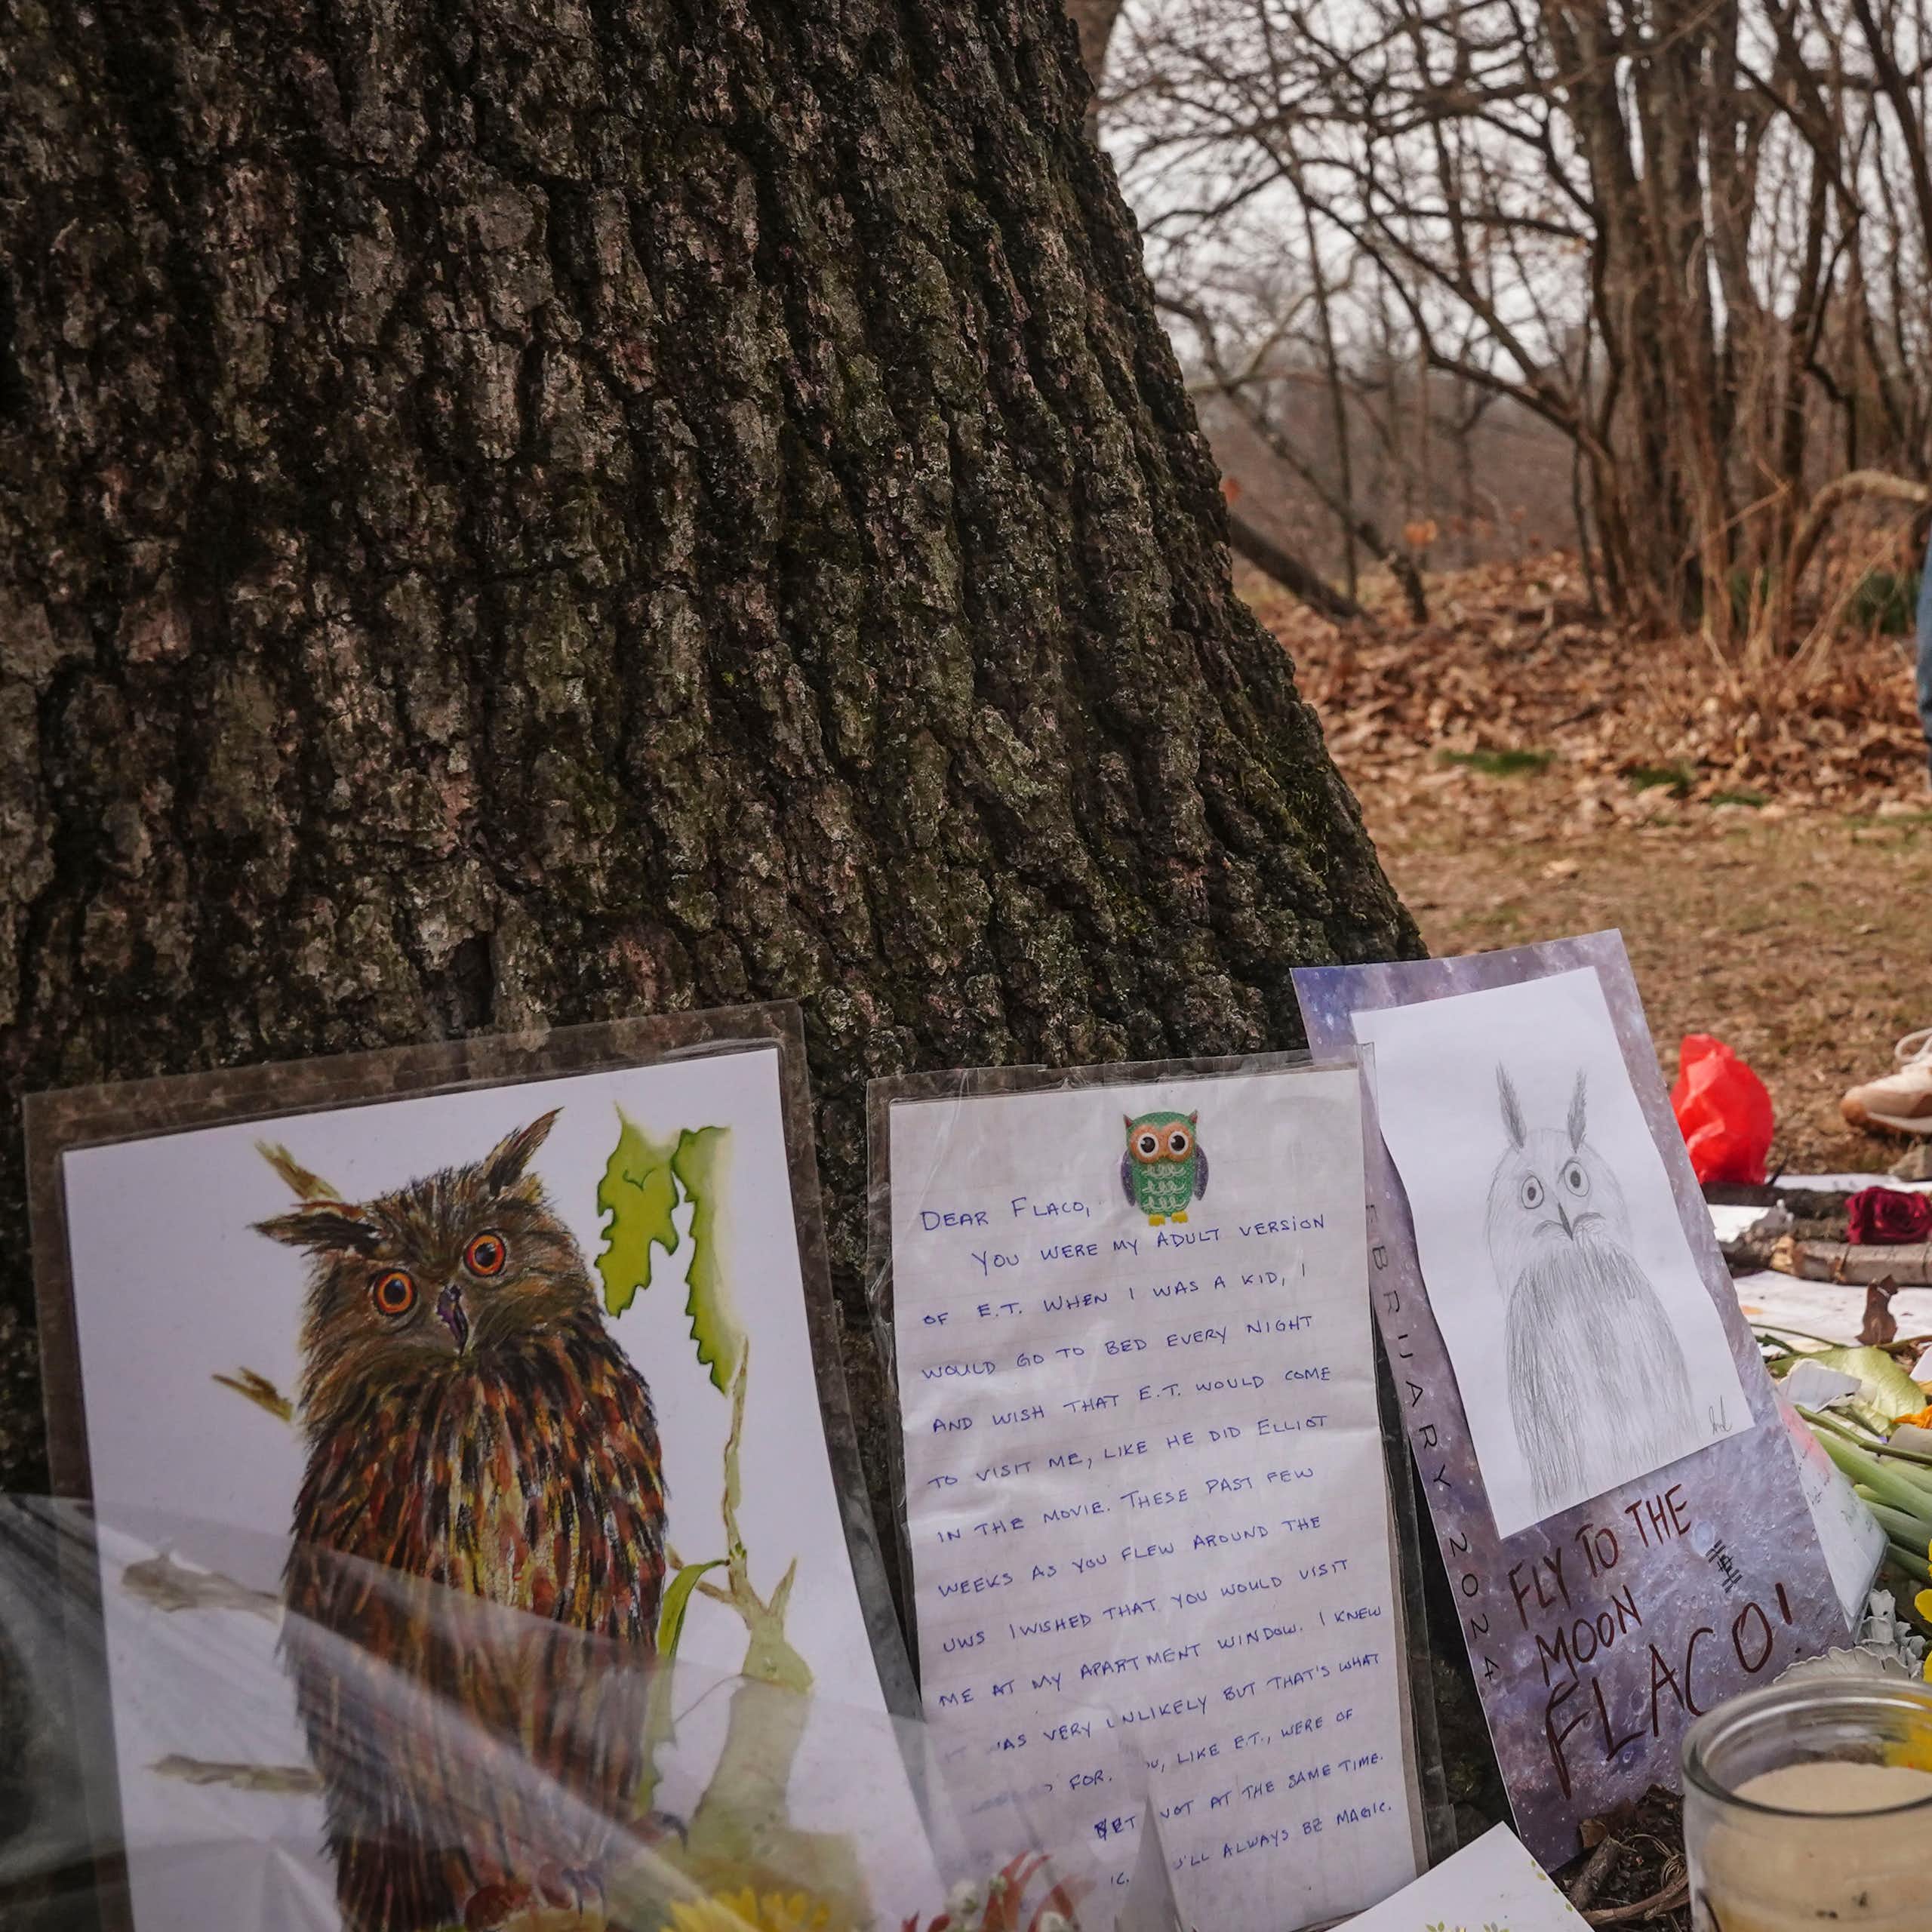 For centuries, owls were considered to bring bad luck in many cultures as well as in the US, but the outpouring of grief in New York over Flaco shows how times have changed